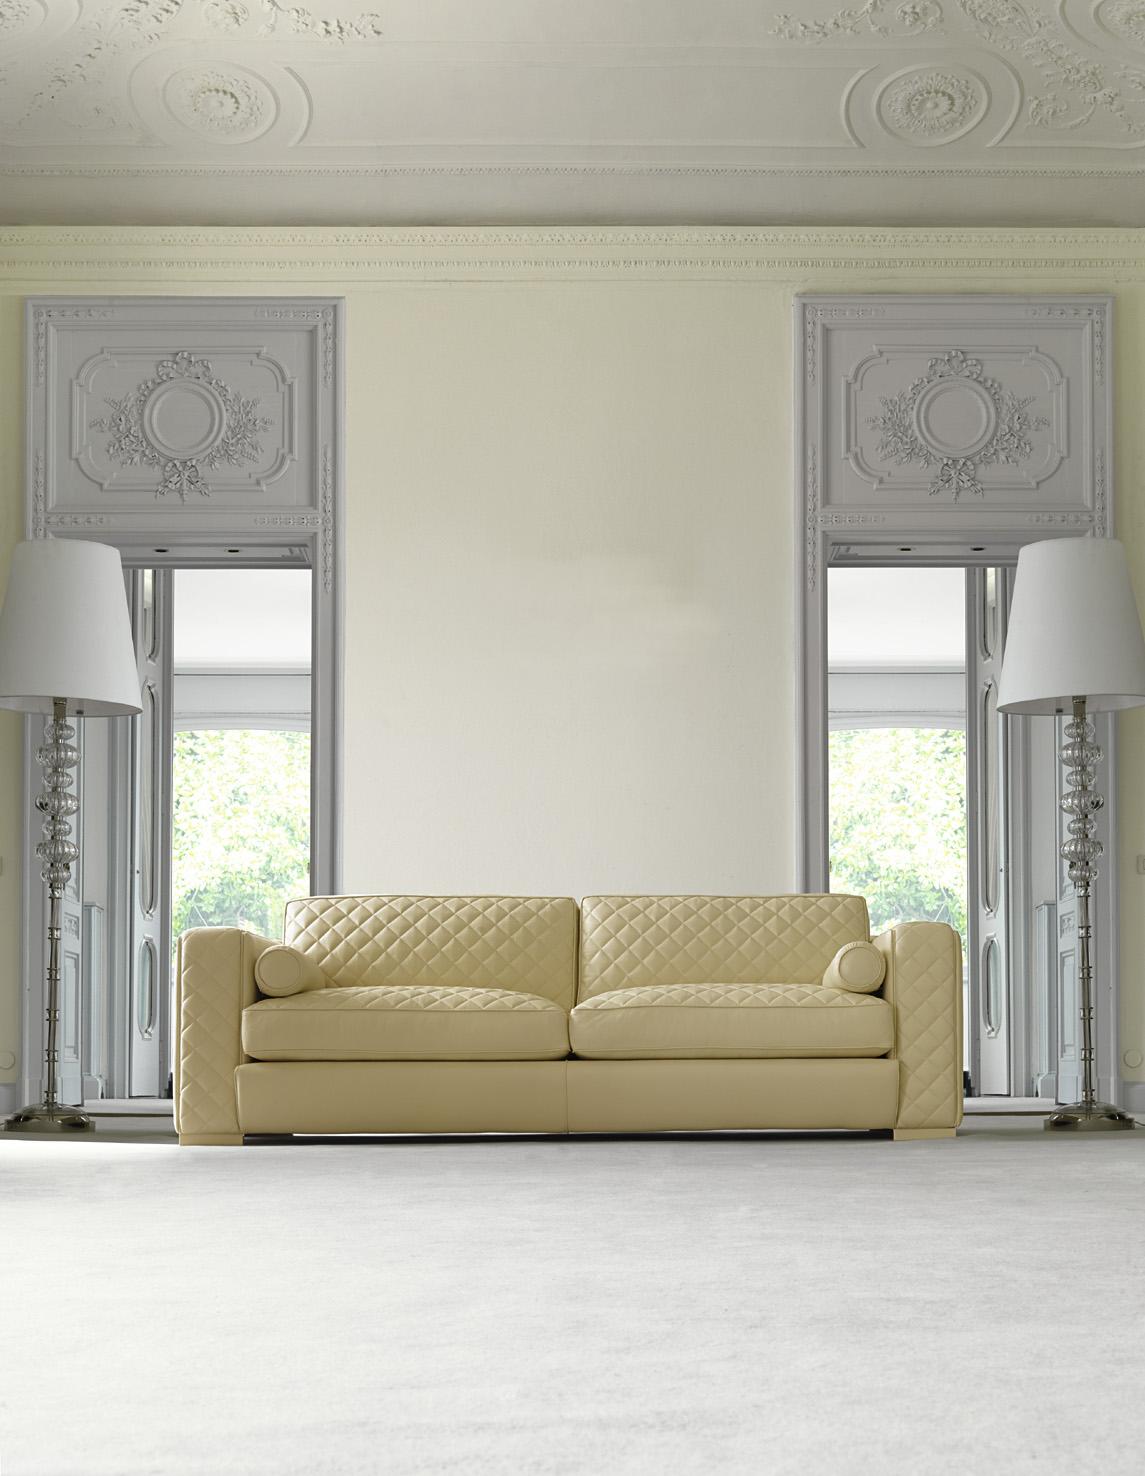 Art Deco Mediterraneo Three-Seat Sofa in Leather with Embroidered Cushions by Zanaboni For Sale